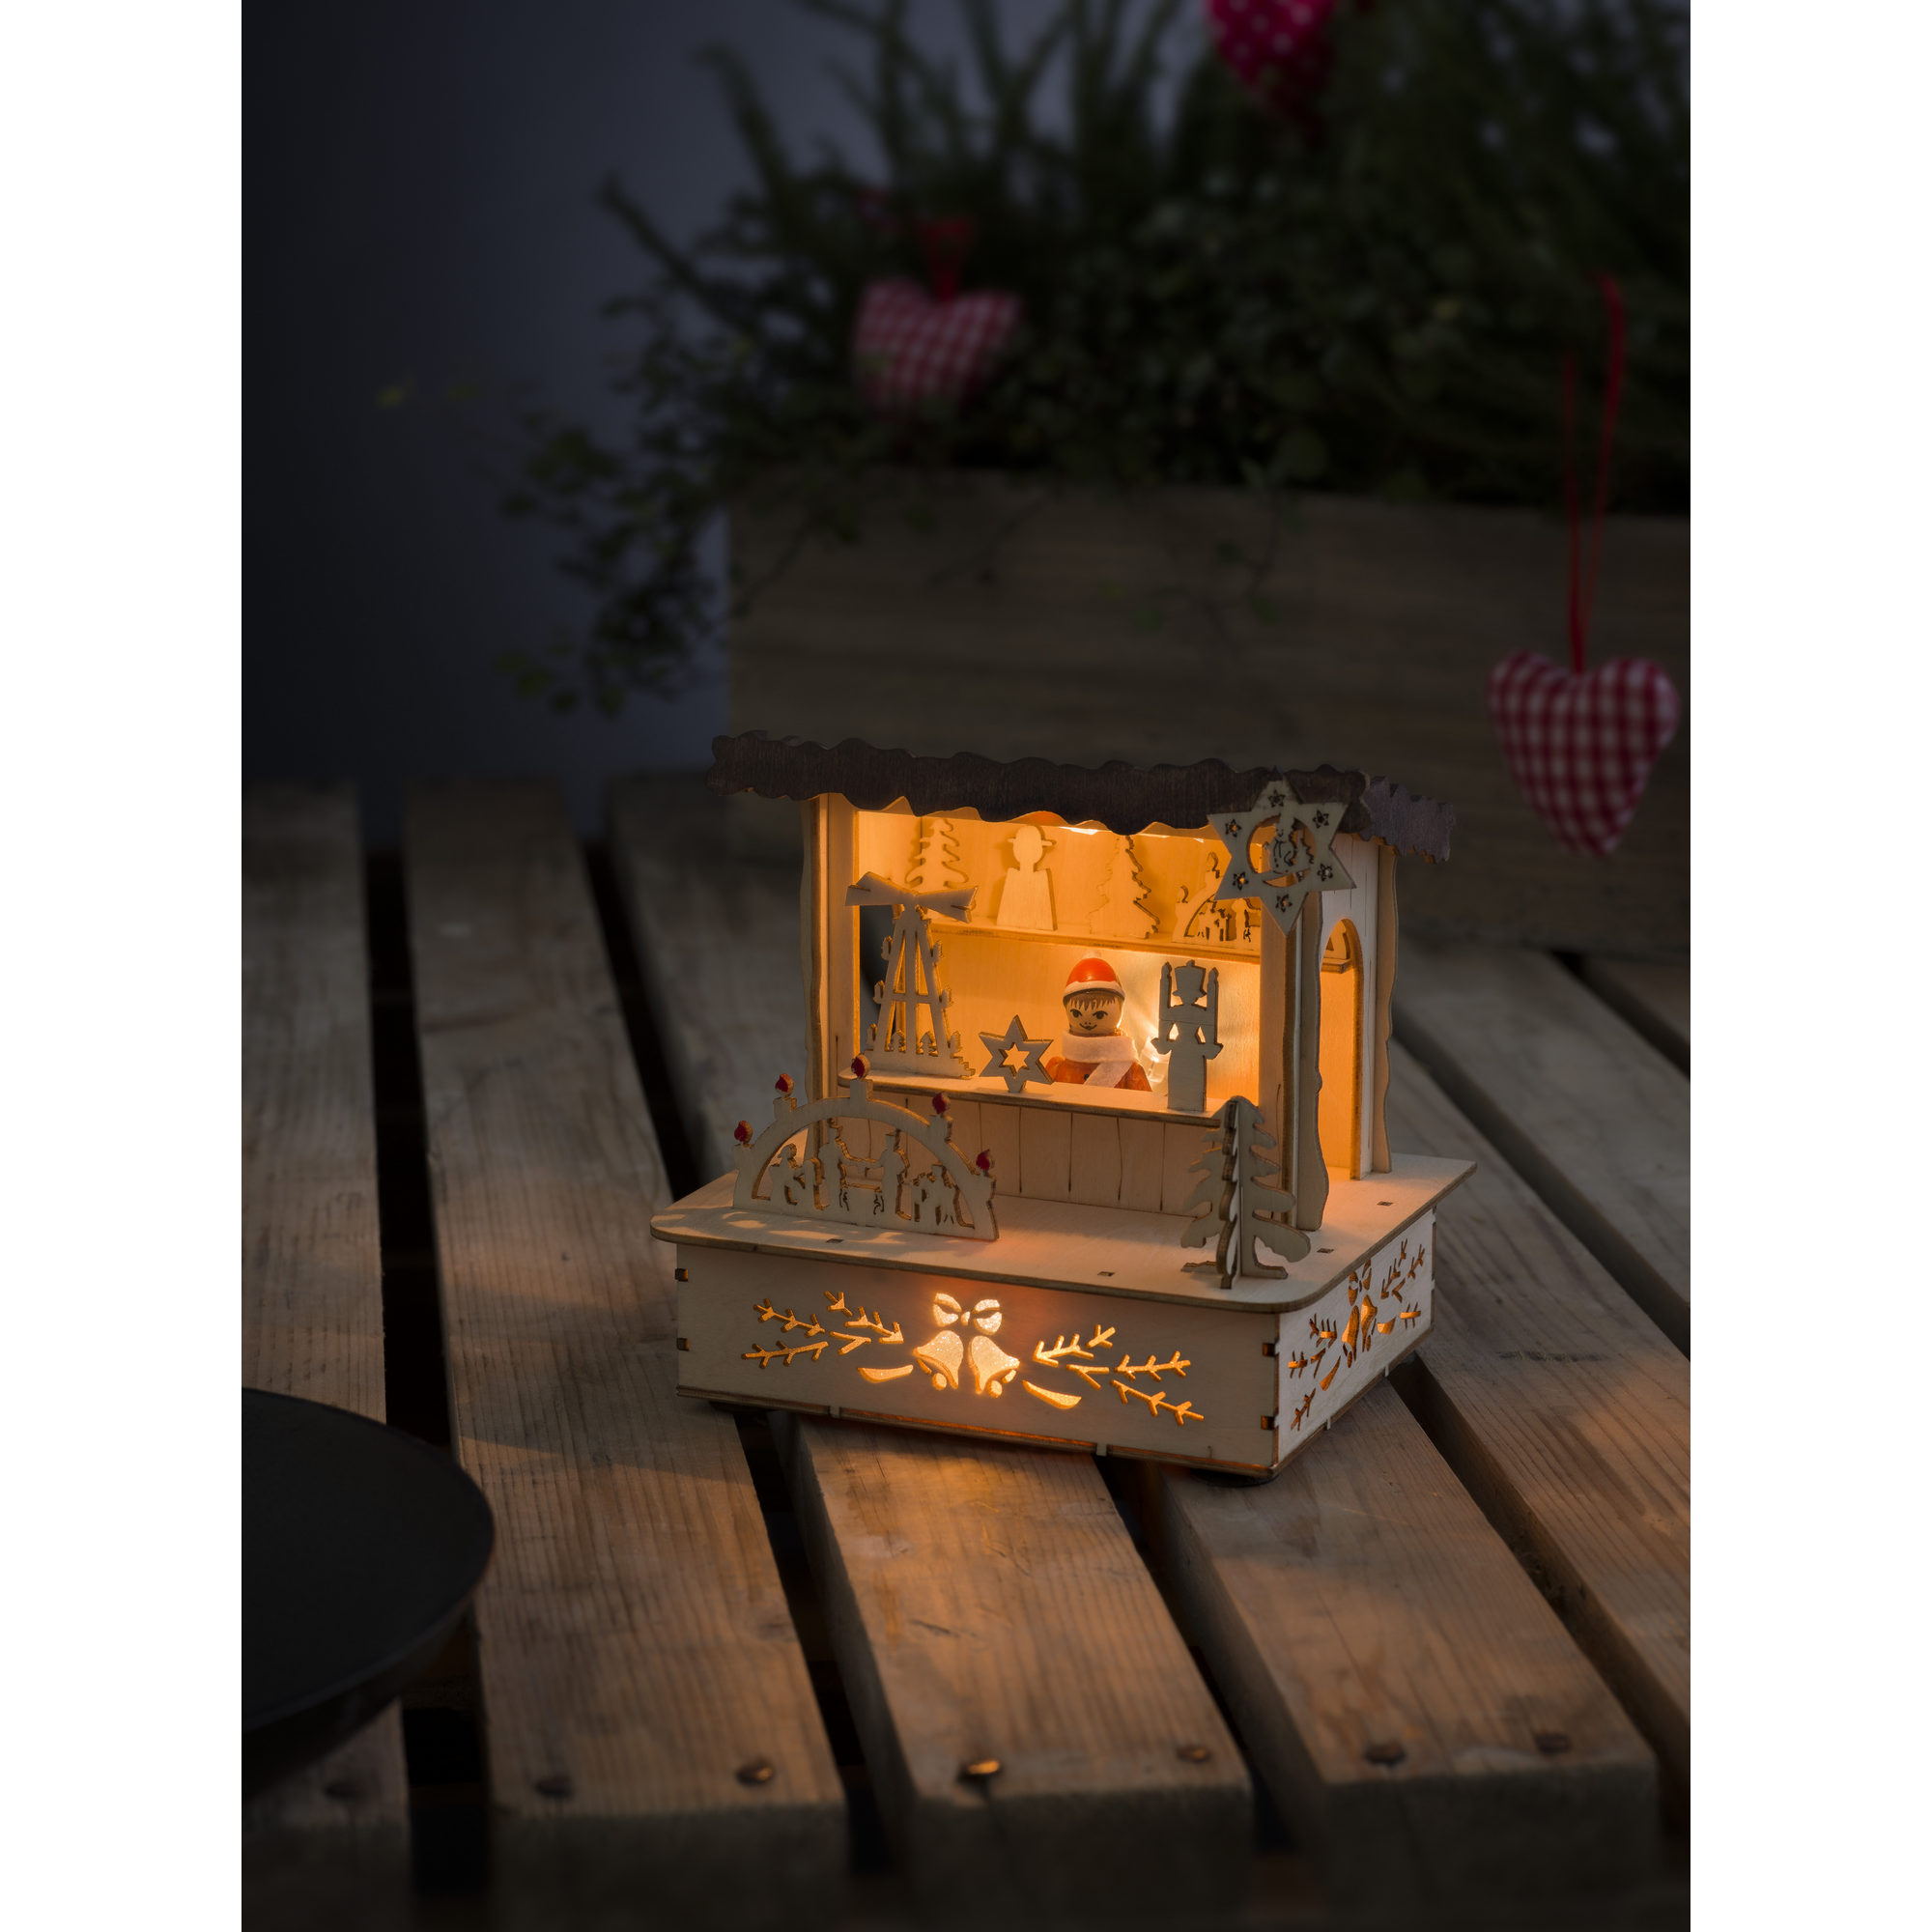 LED-Holzsilhouette 'Weihnachtsmarkt' naturfarben 9,5 x 12,5 x 9,5 cm + product picture